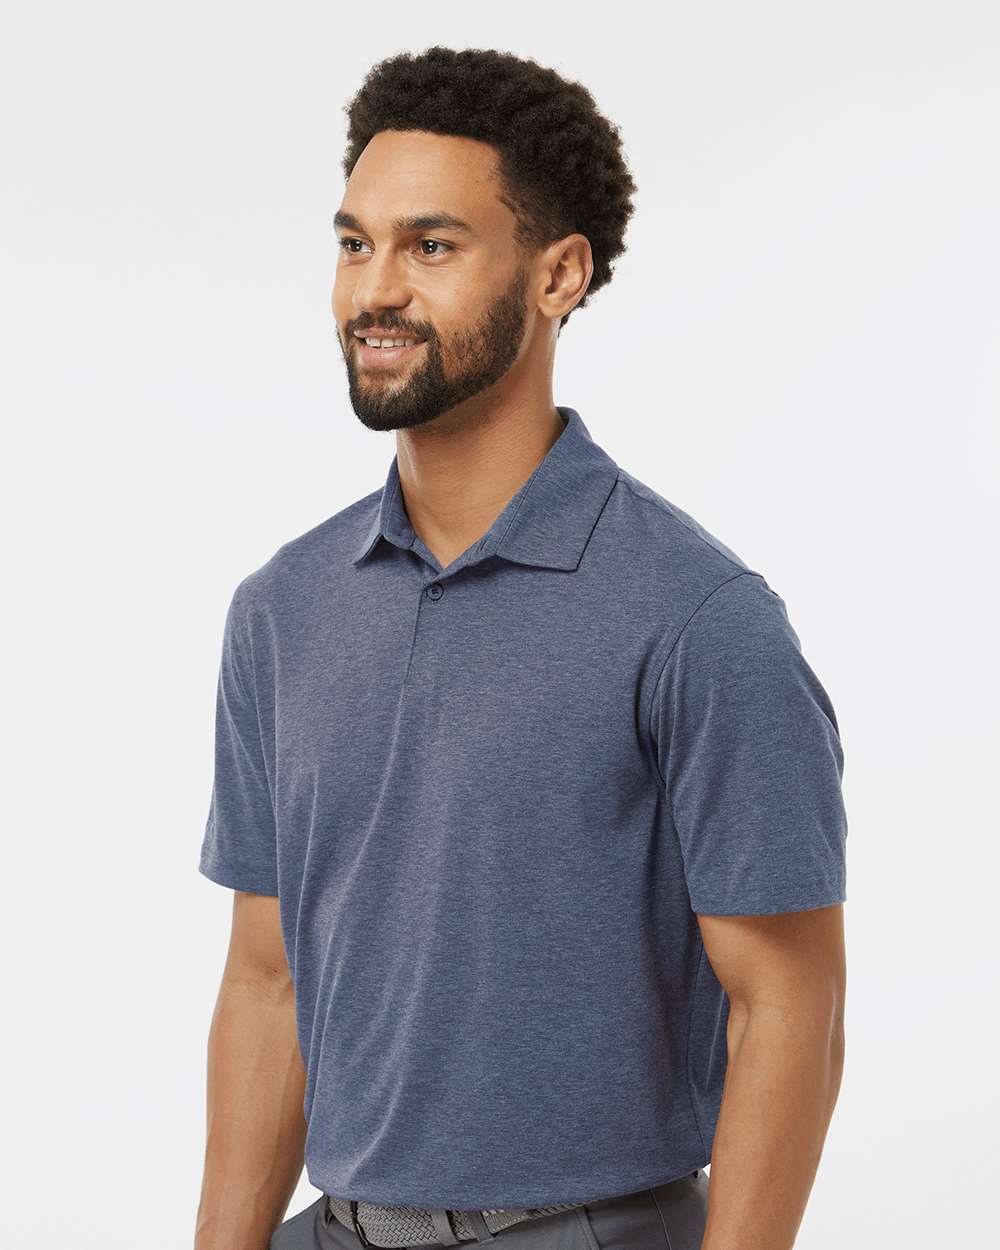 Adidas A590 Blend Polo T-Shirt #colormdl_Collegiate Navy Melange